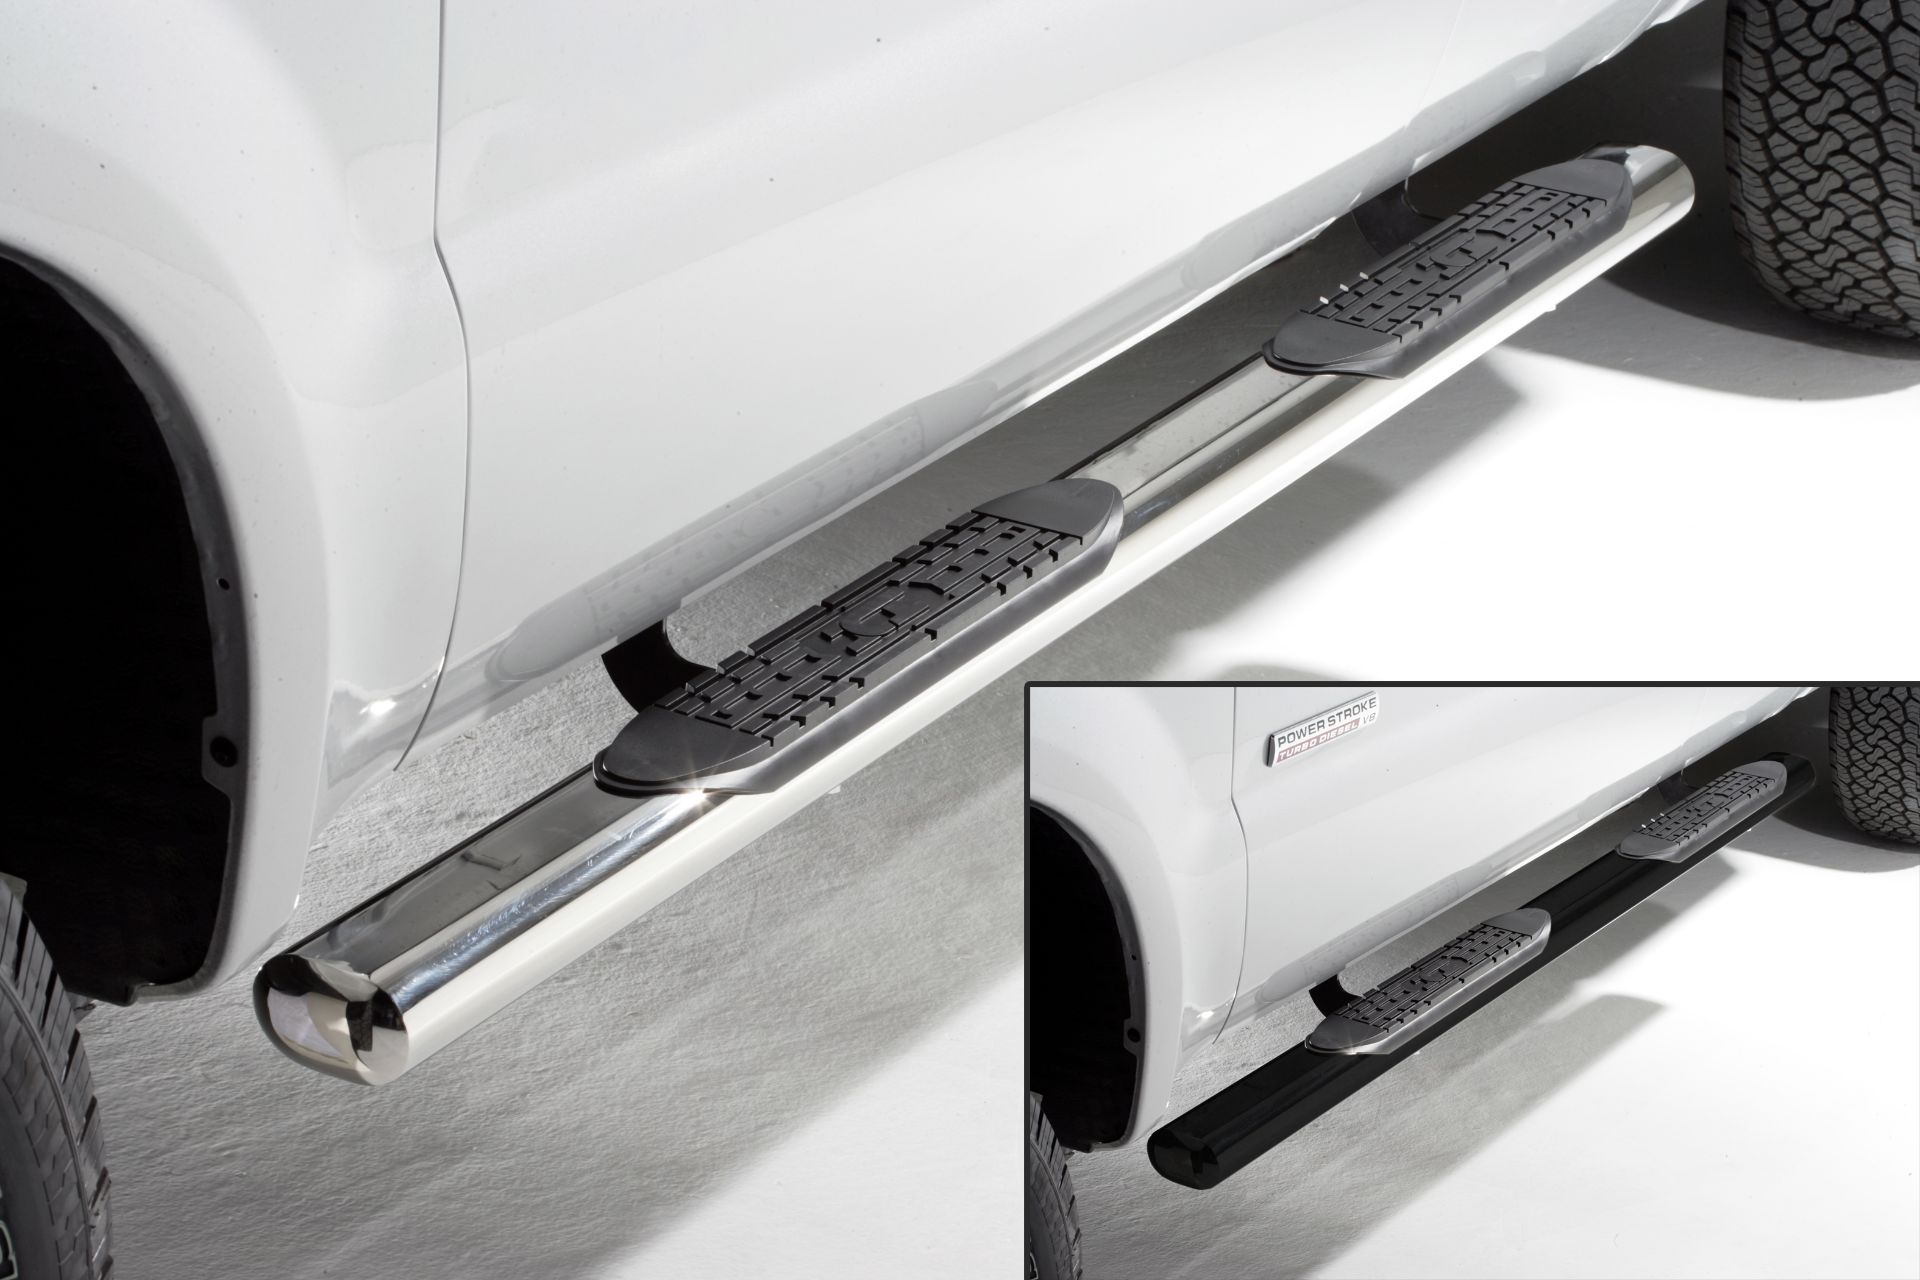 FIV88FD 2009-2013 FORD F-150 S.S STEP BAR - Image 2 of 2